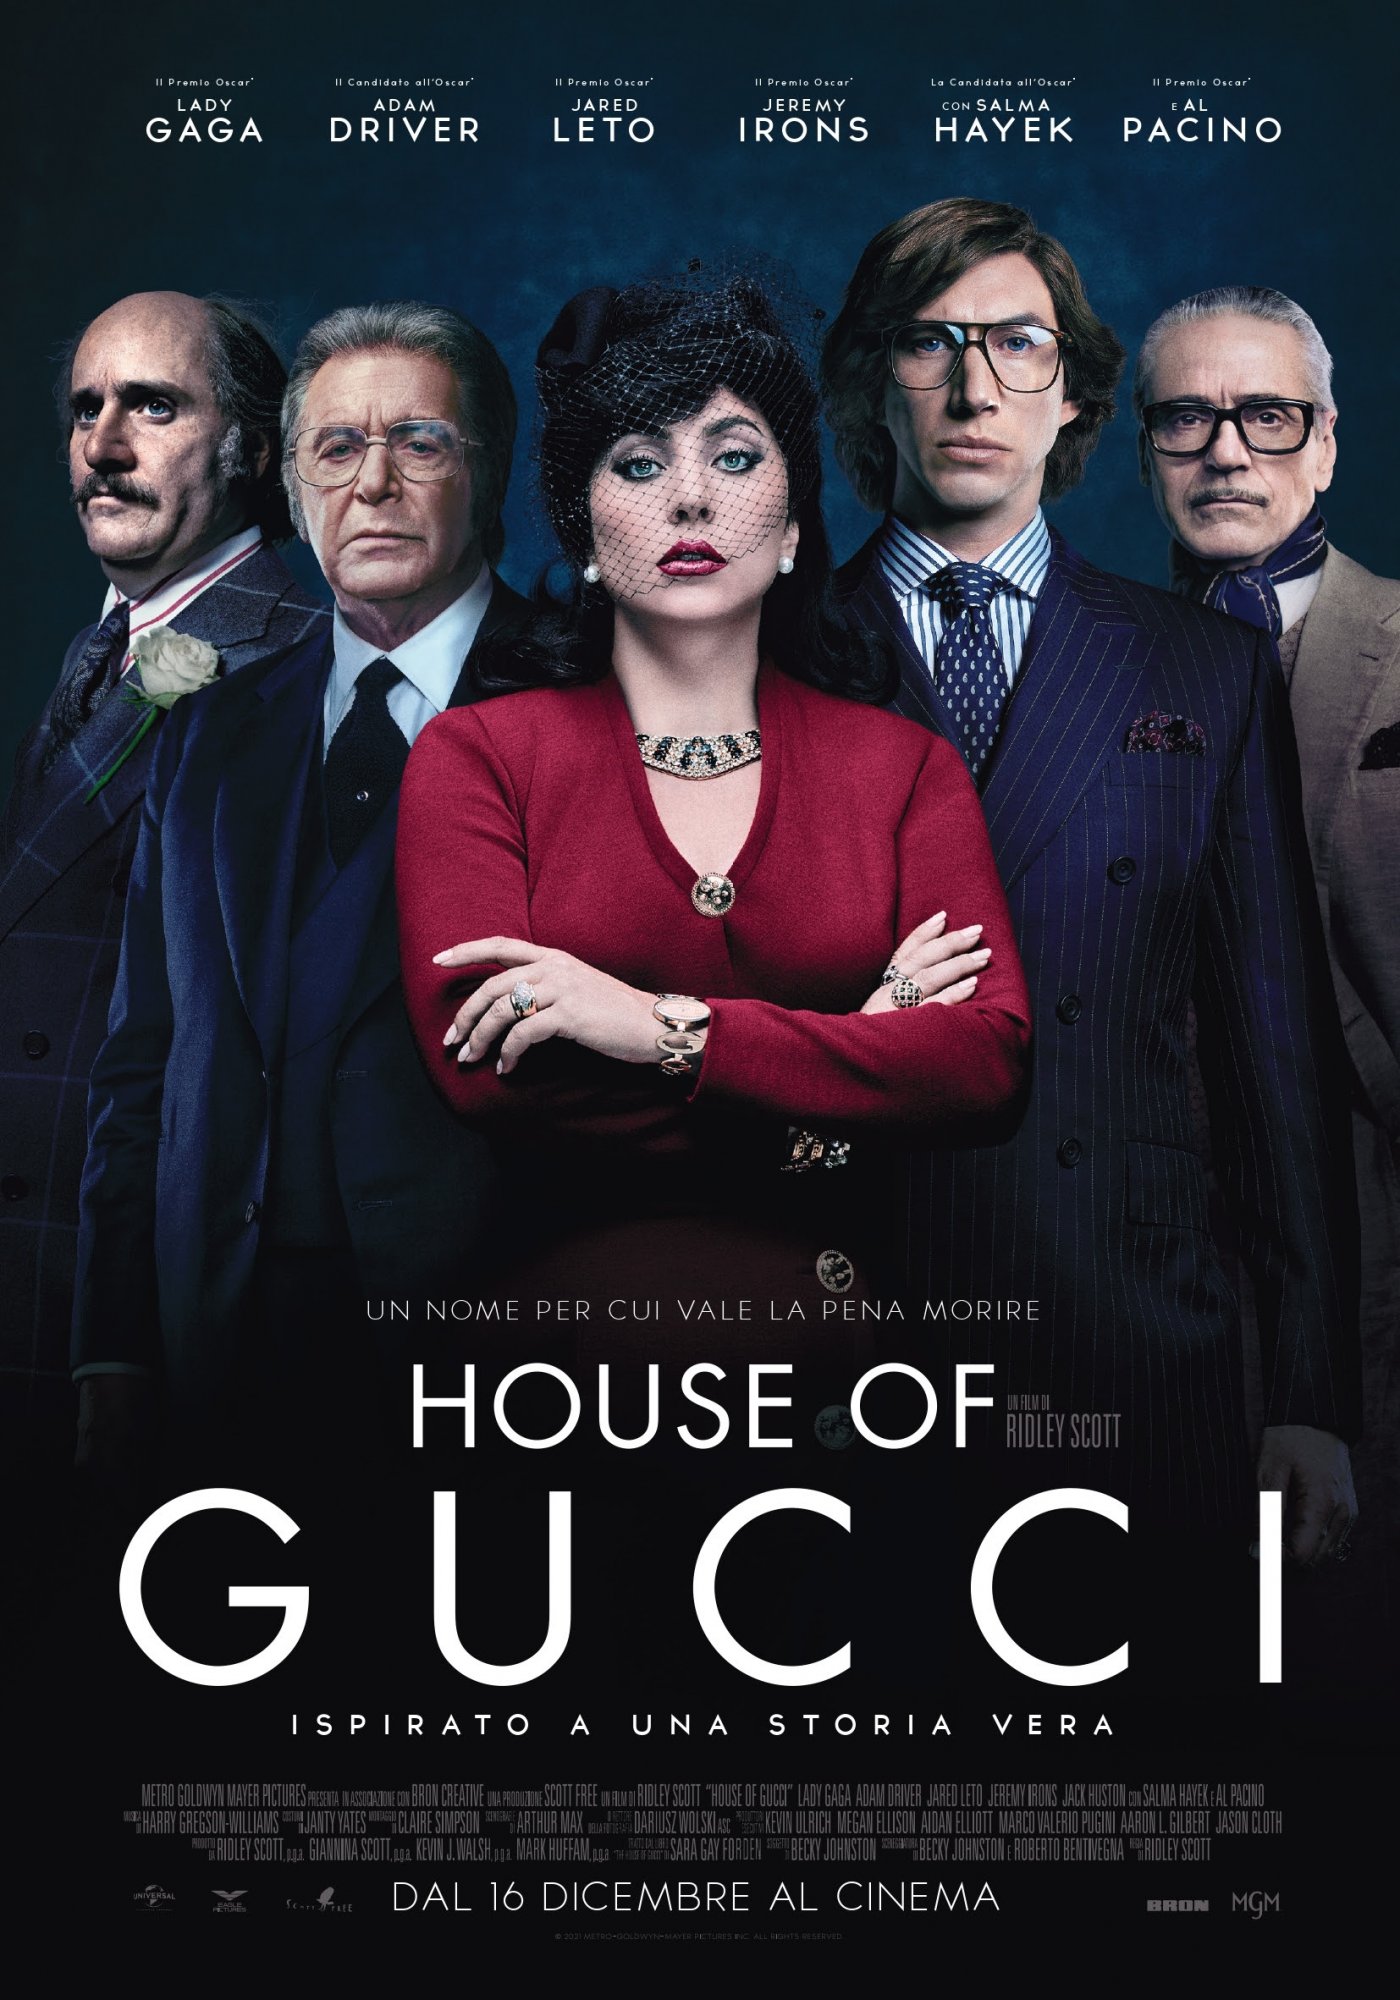 https://movieplayer.it/film/house-of-gucci_27531/